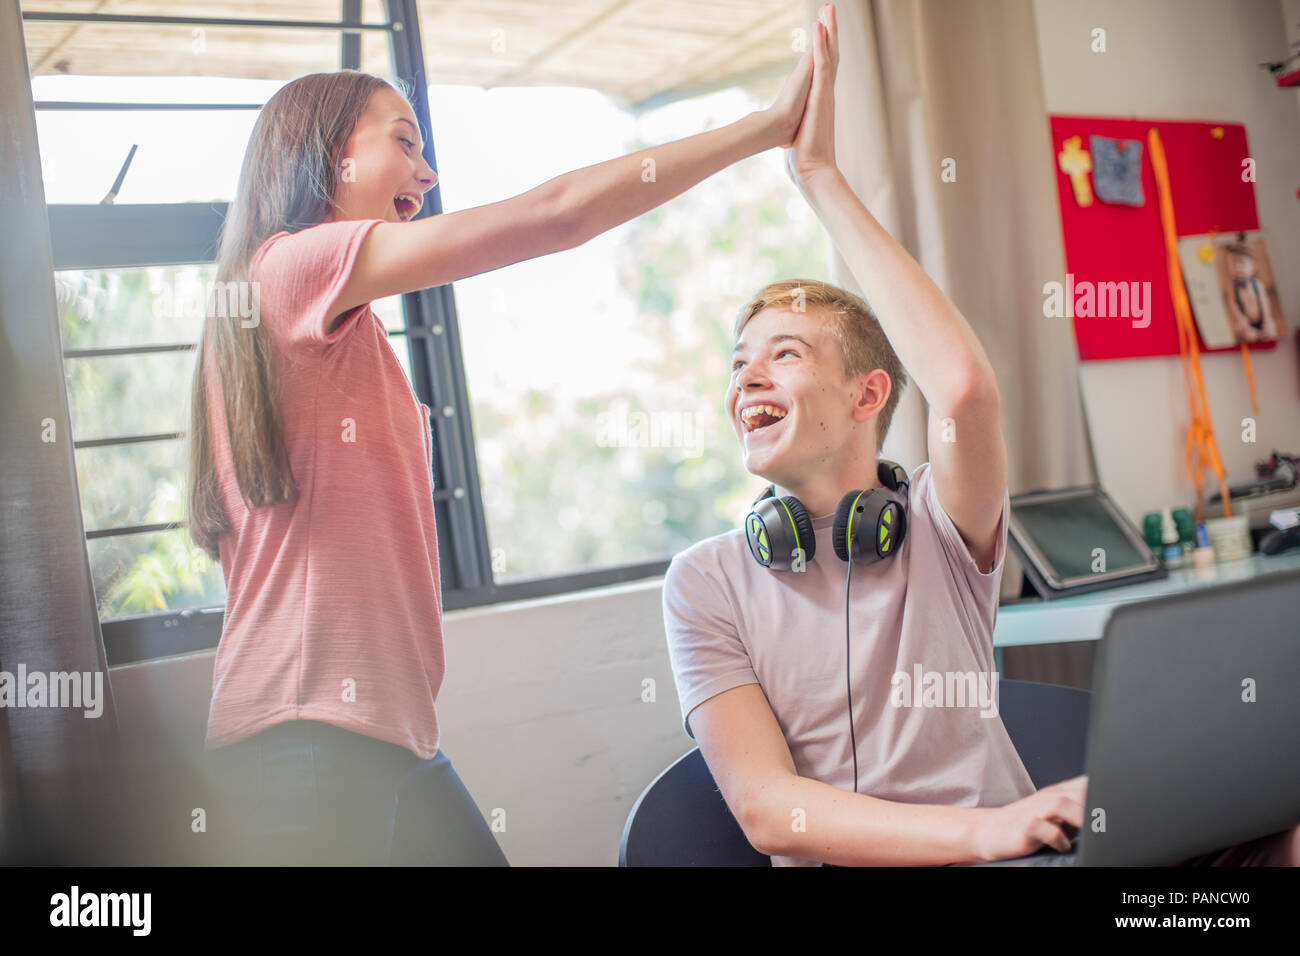 Happy teenage girl and boy with laptop high fiving Stock Photo